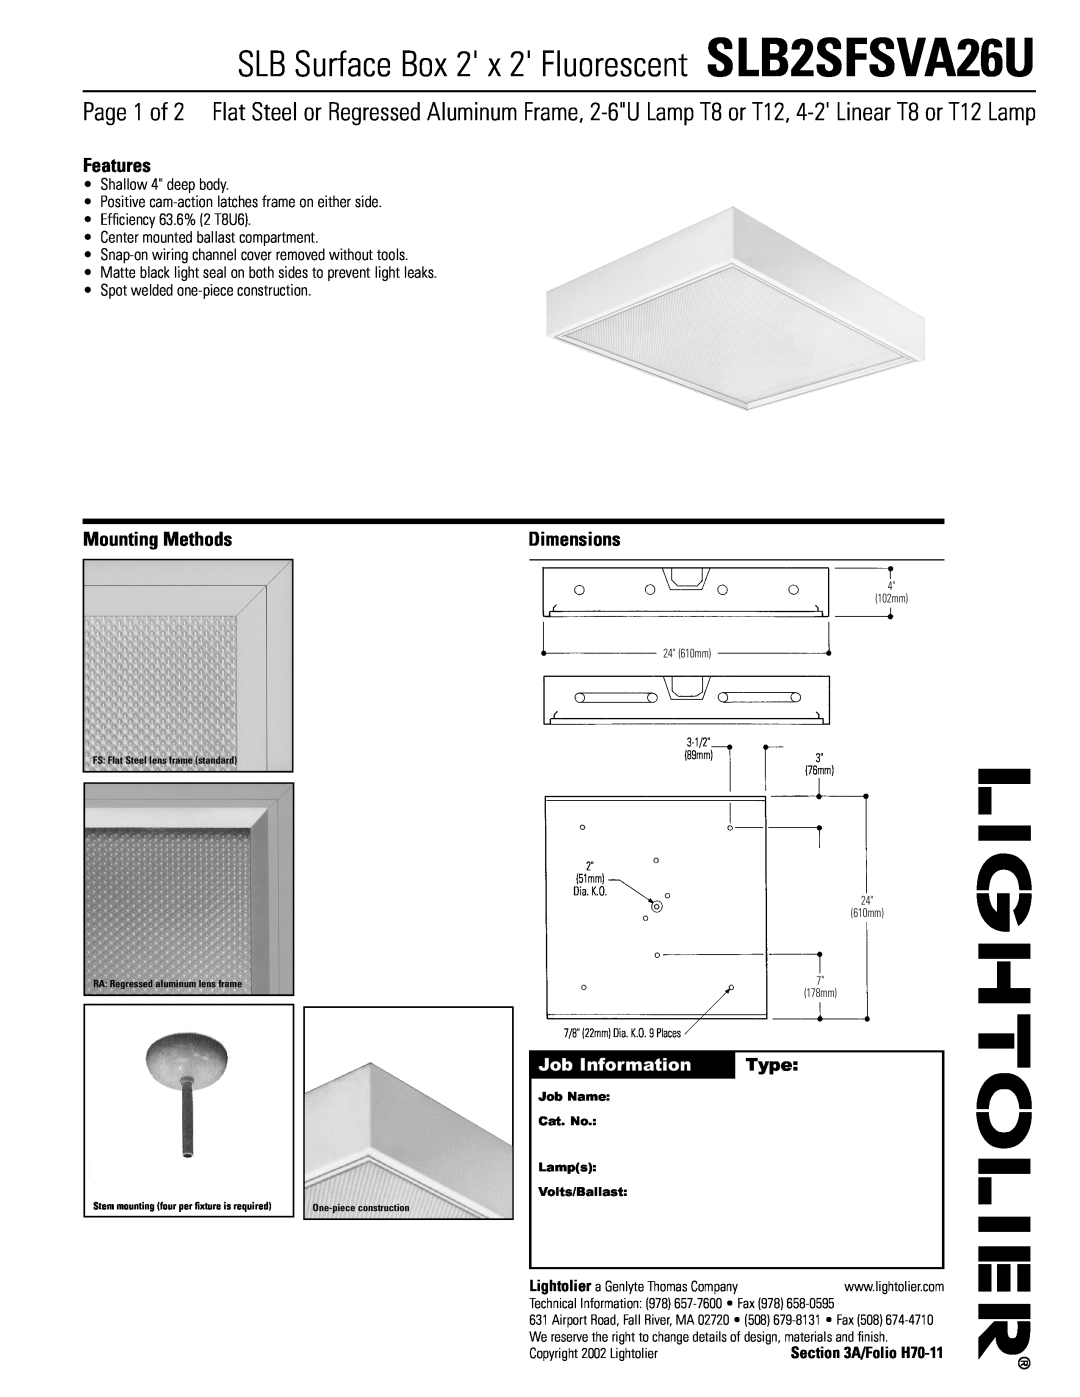 Lightolier dimensions SLB Surface Box 2 x 2 Fluorescent SLB2SFSVA26U, Features, Mounting Methods, Dimensions, Type 